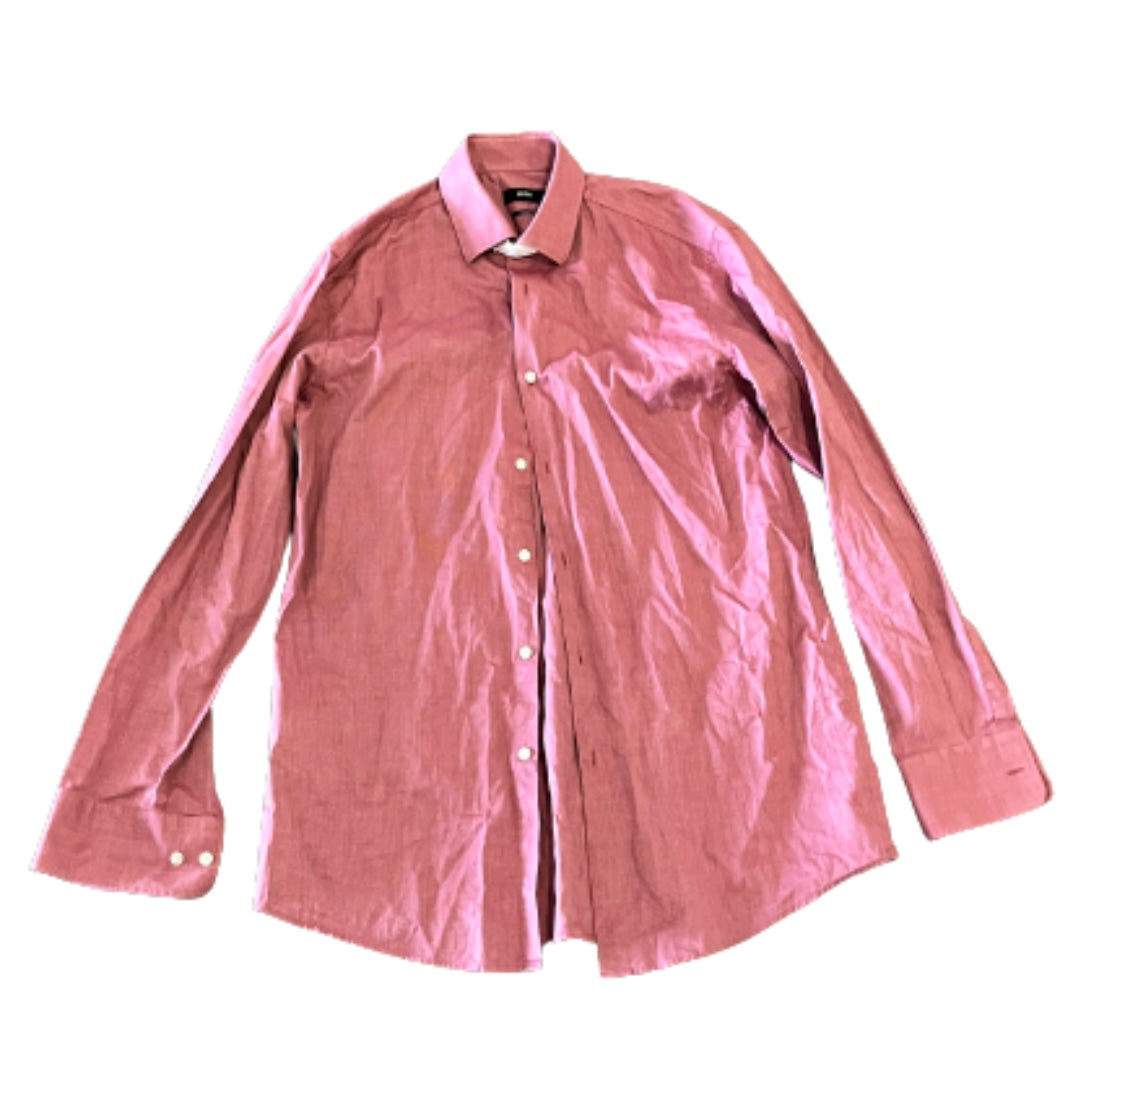 THE OFFICE: Andy’s Pink Button Up Shirt (16)